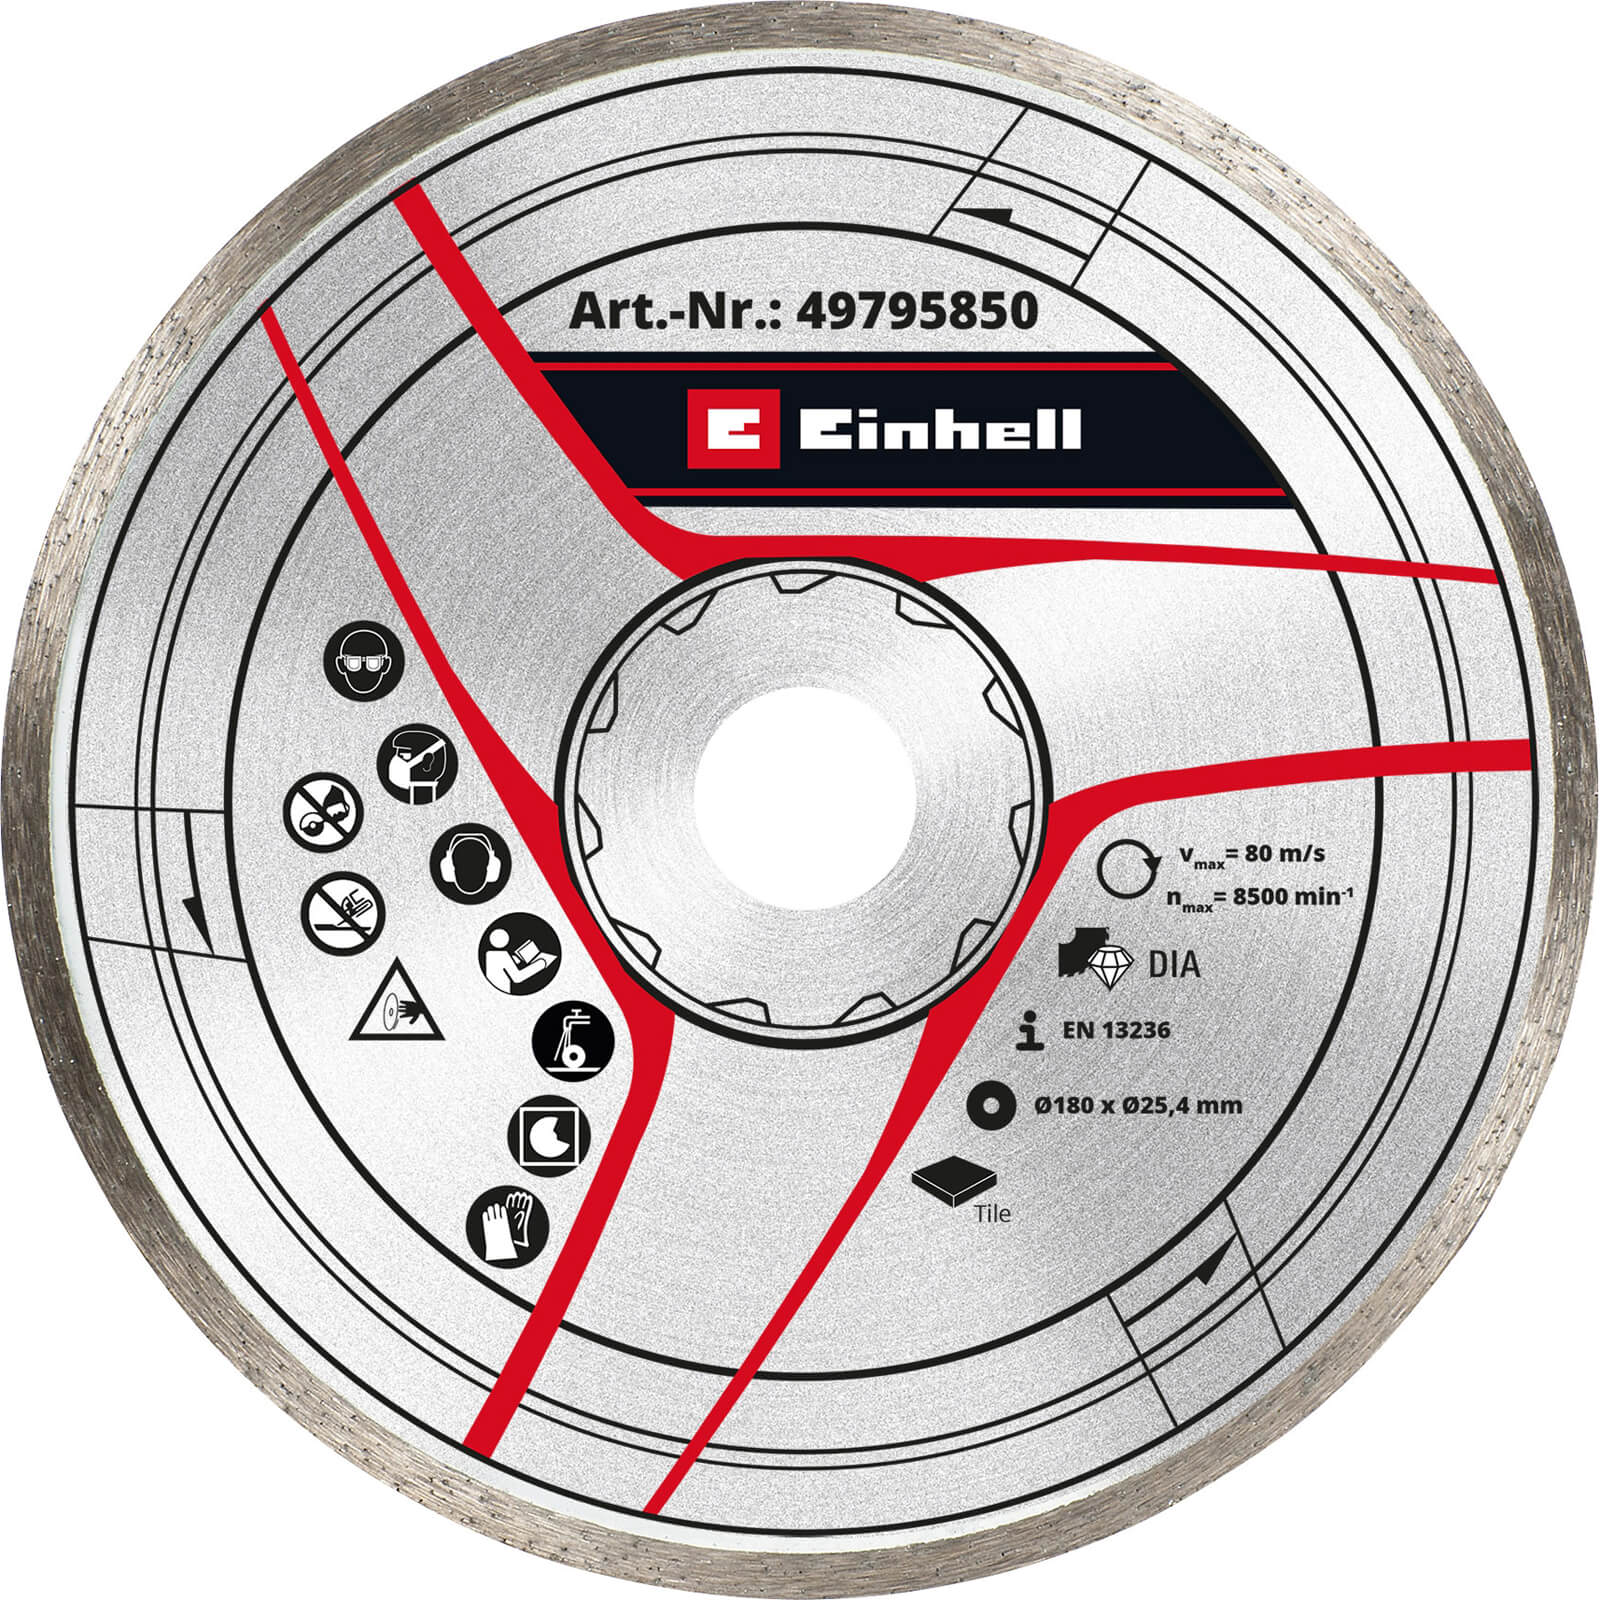 Image of Einhell Tile Saw Diamond Blade 180mm 6mm 25.4mm